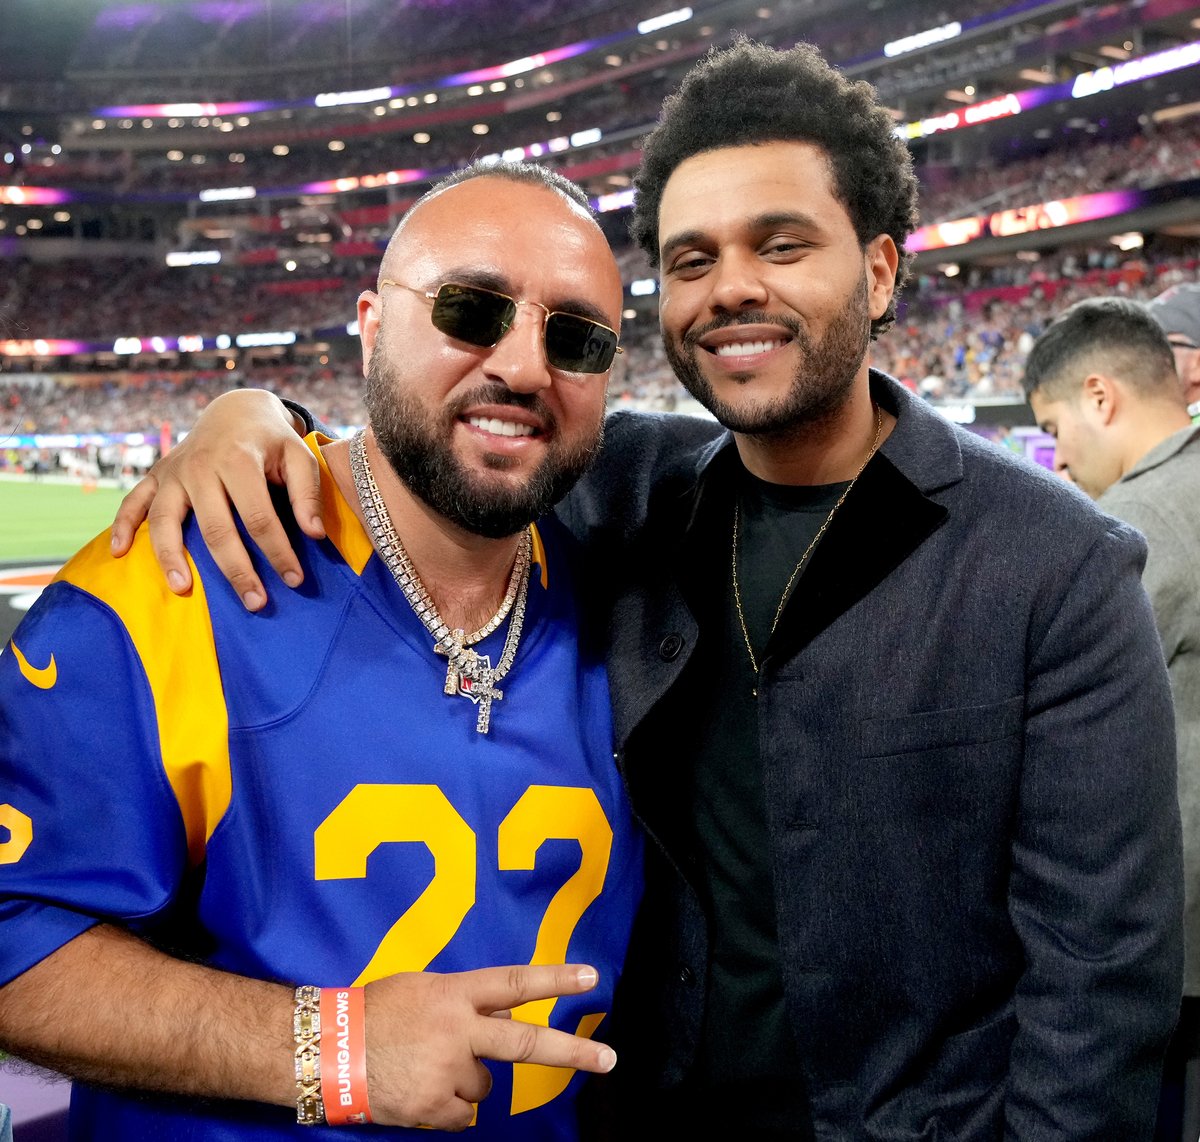 Wassim Slaiby and The Weeknd attend the Super Bowl in Inglewood, California.